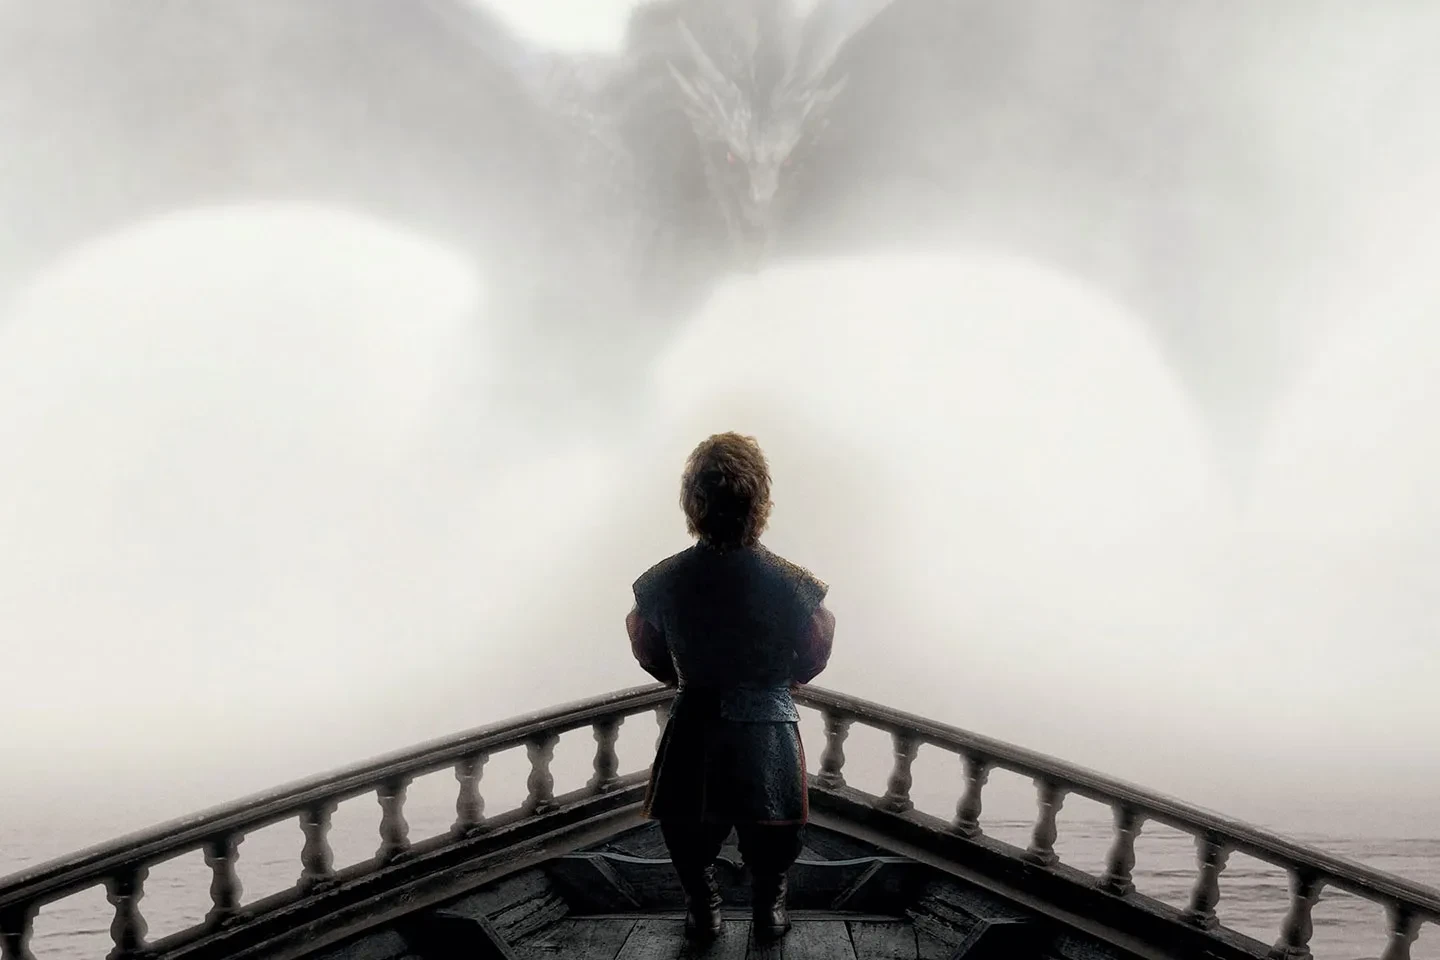 Tyrion Lannister and Drogon